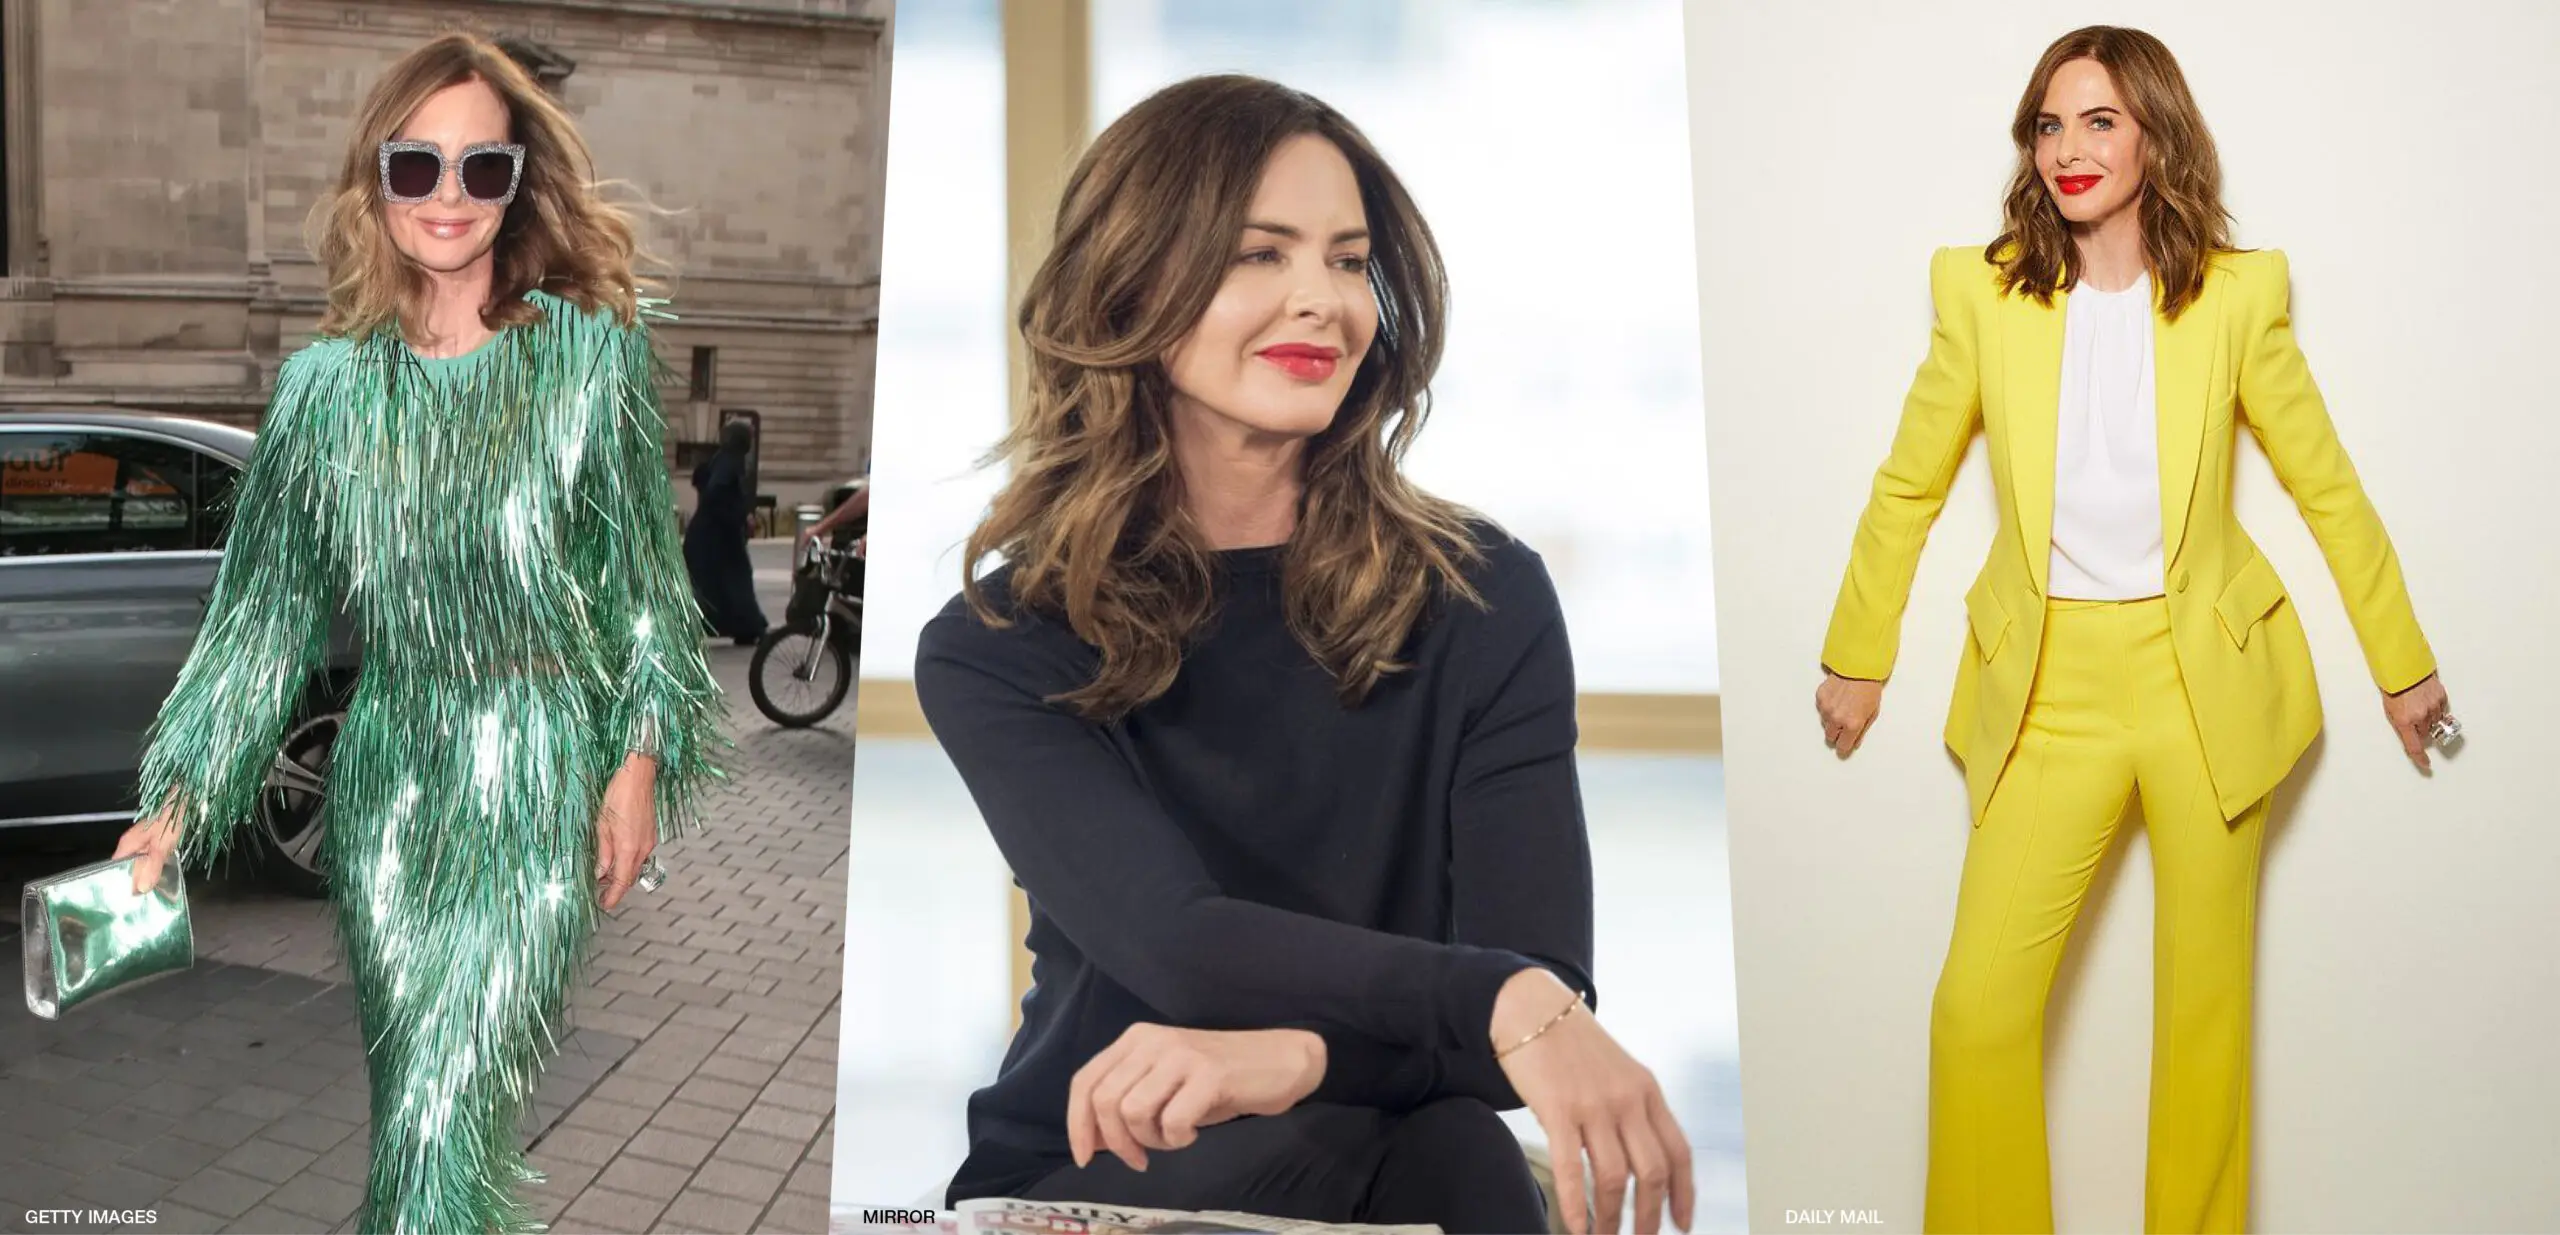 How Trinny Woodall Went From Reality Star To Beauty Mogul